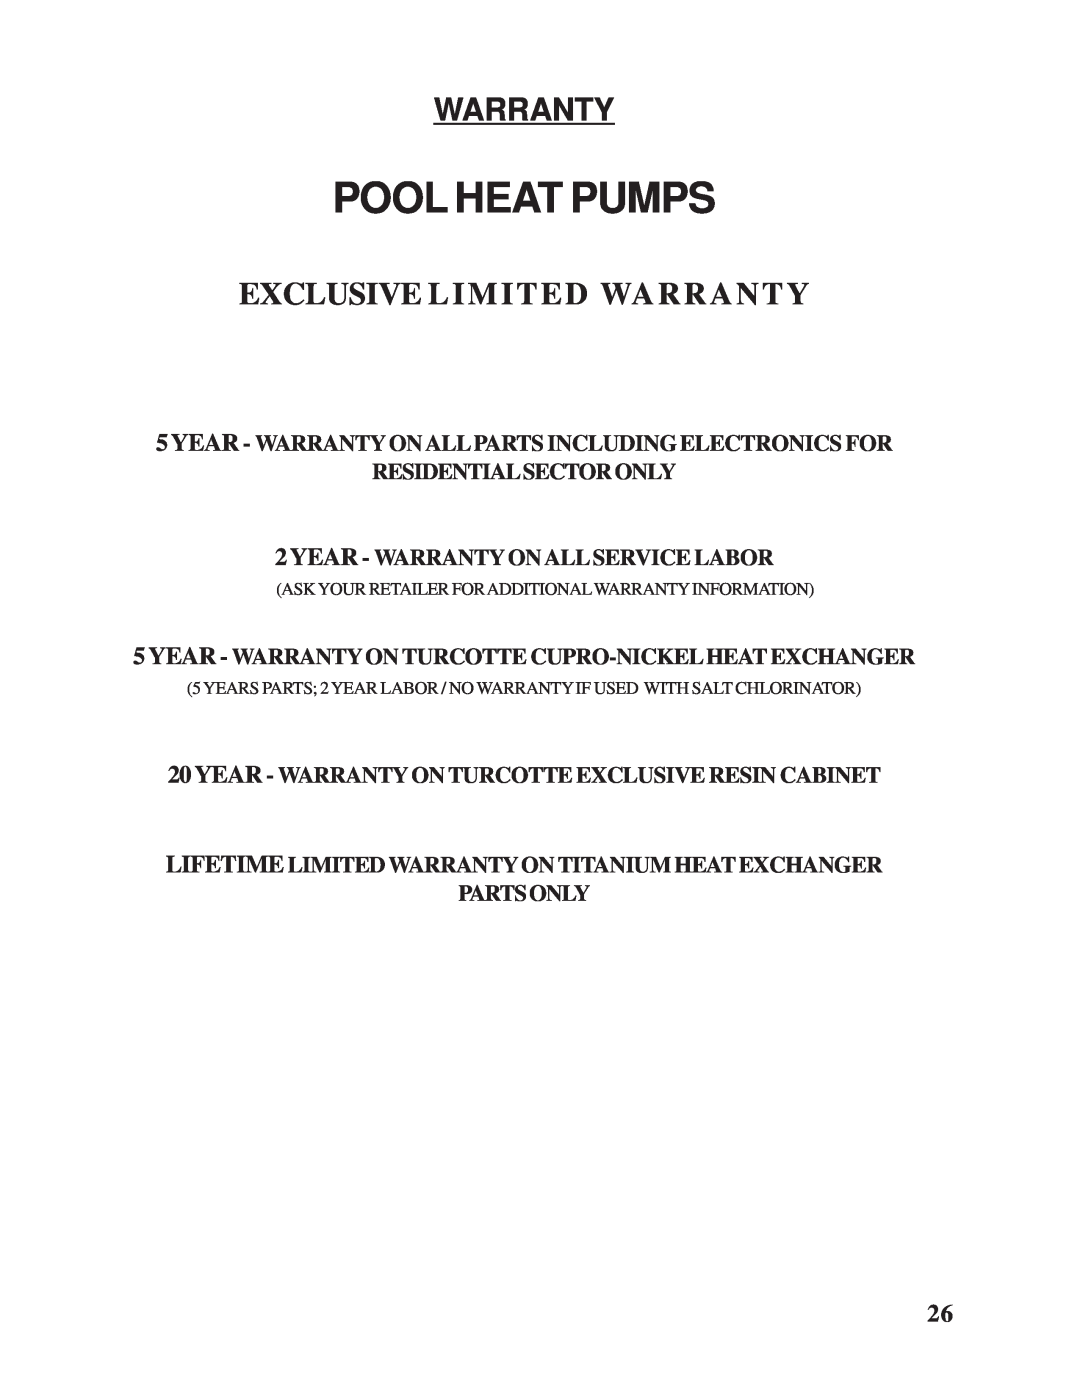 Taylor owner manual Pool Heat Pumps, Exclusive Limited Warranty 